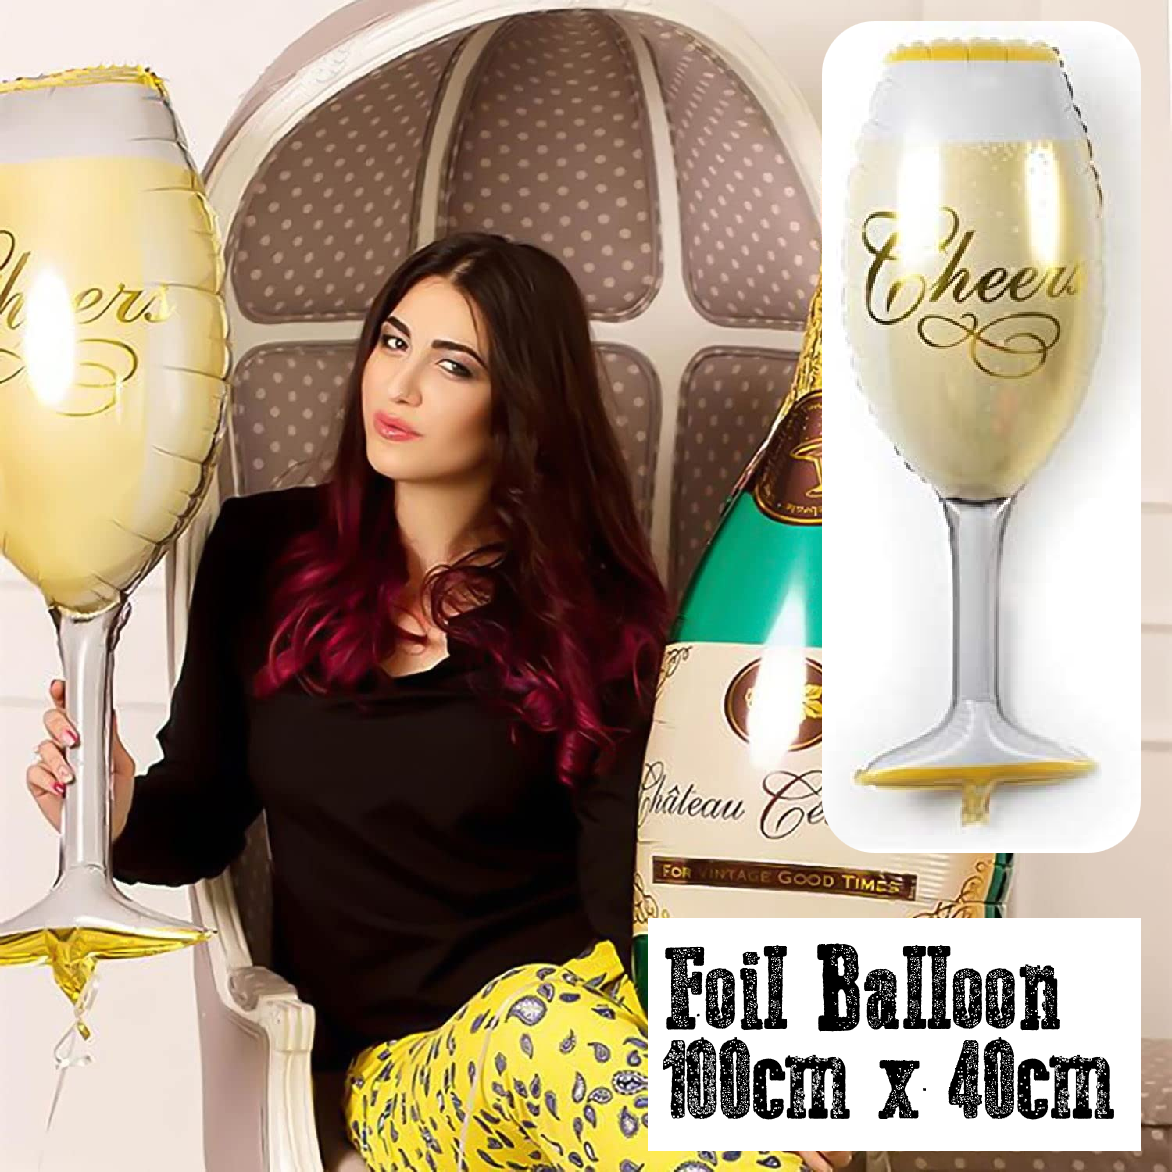 Party Decorations Balloon/ Large Foil Balloon - Wine Glass